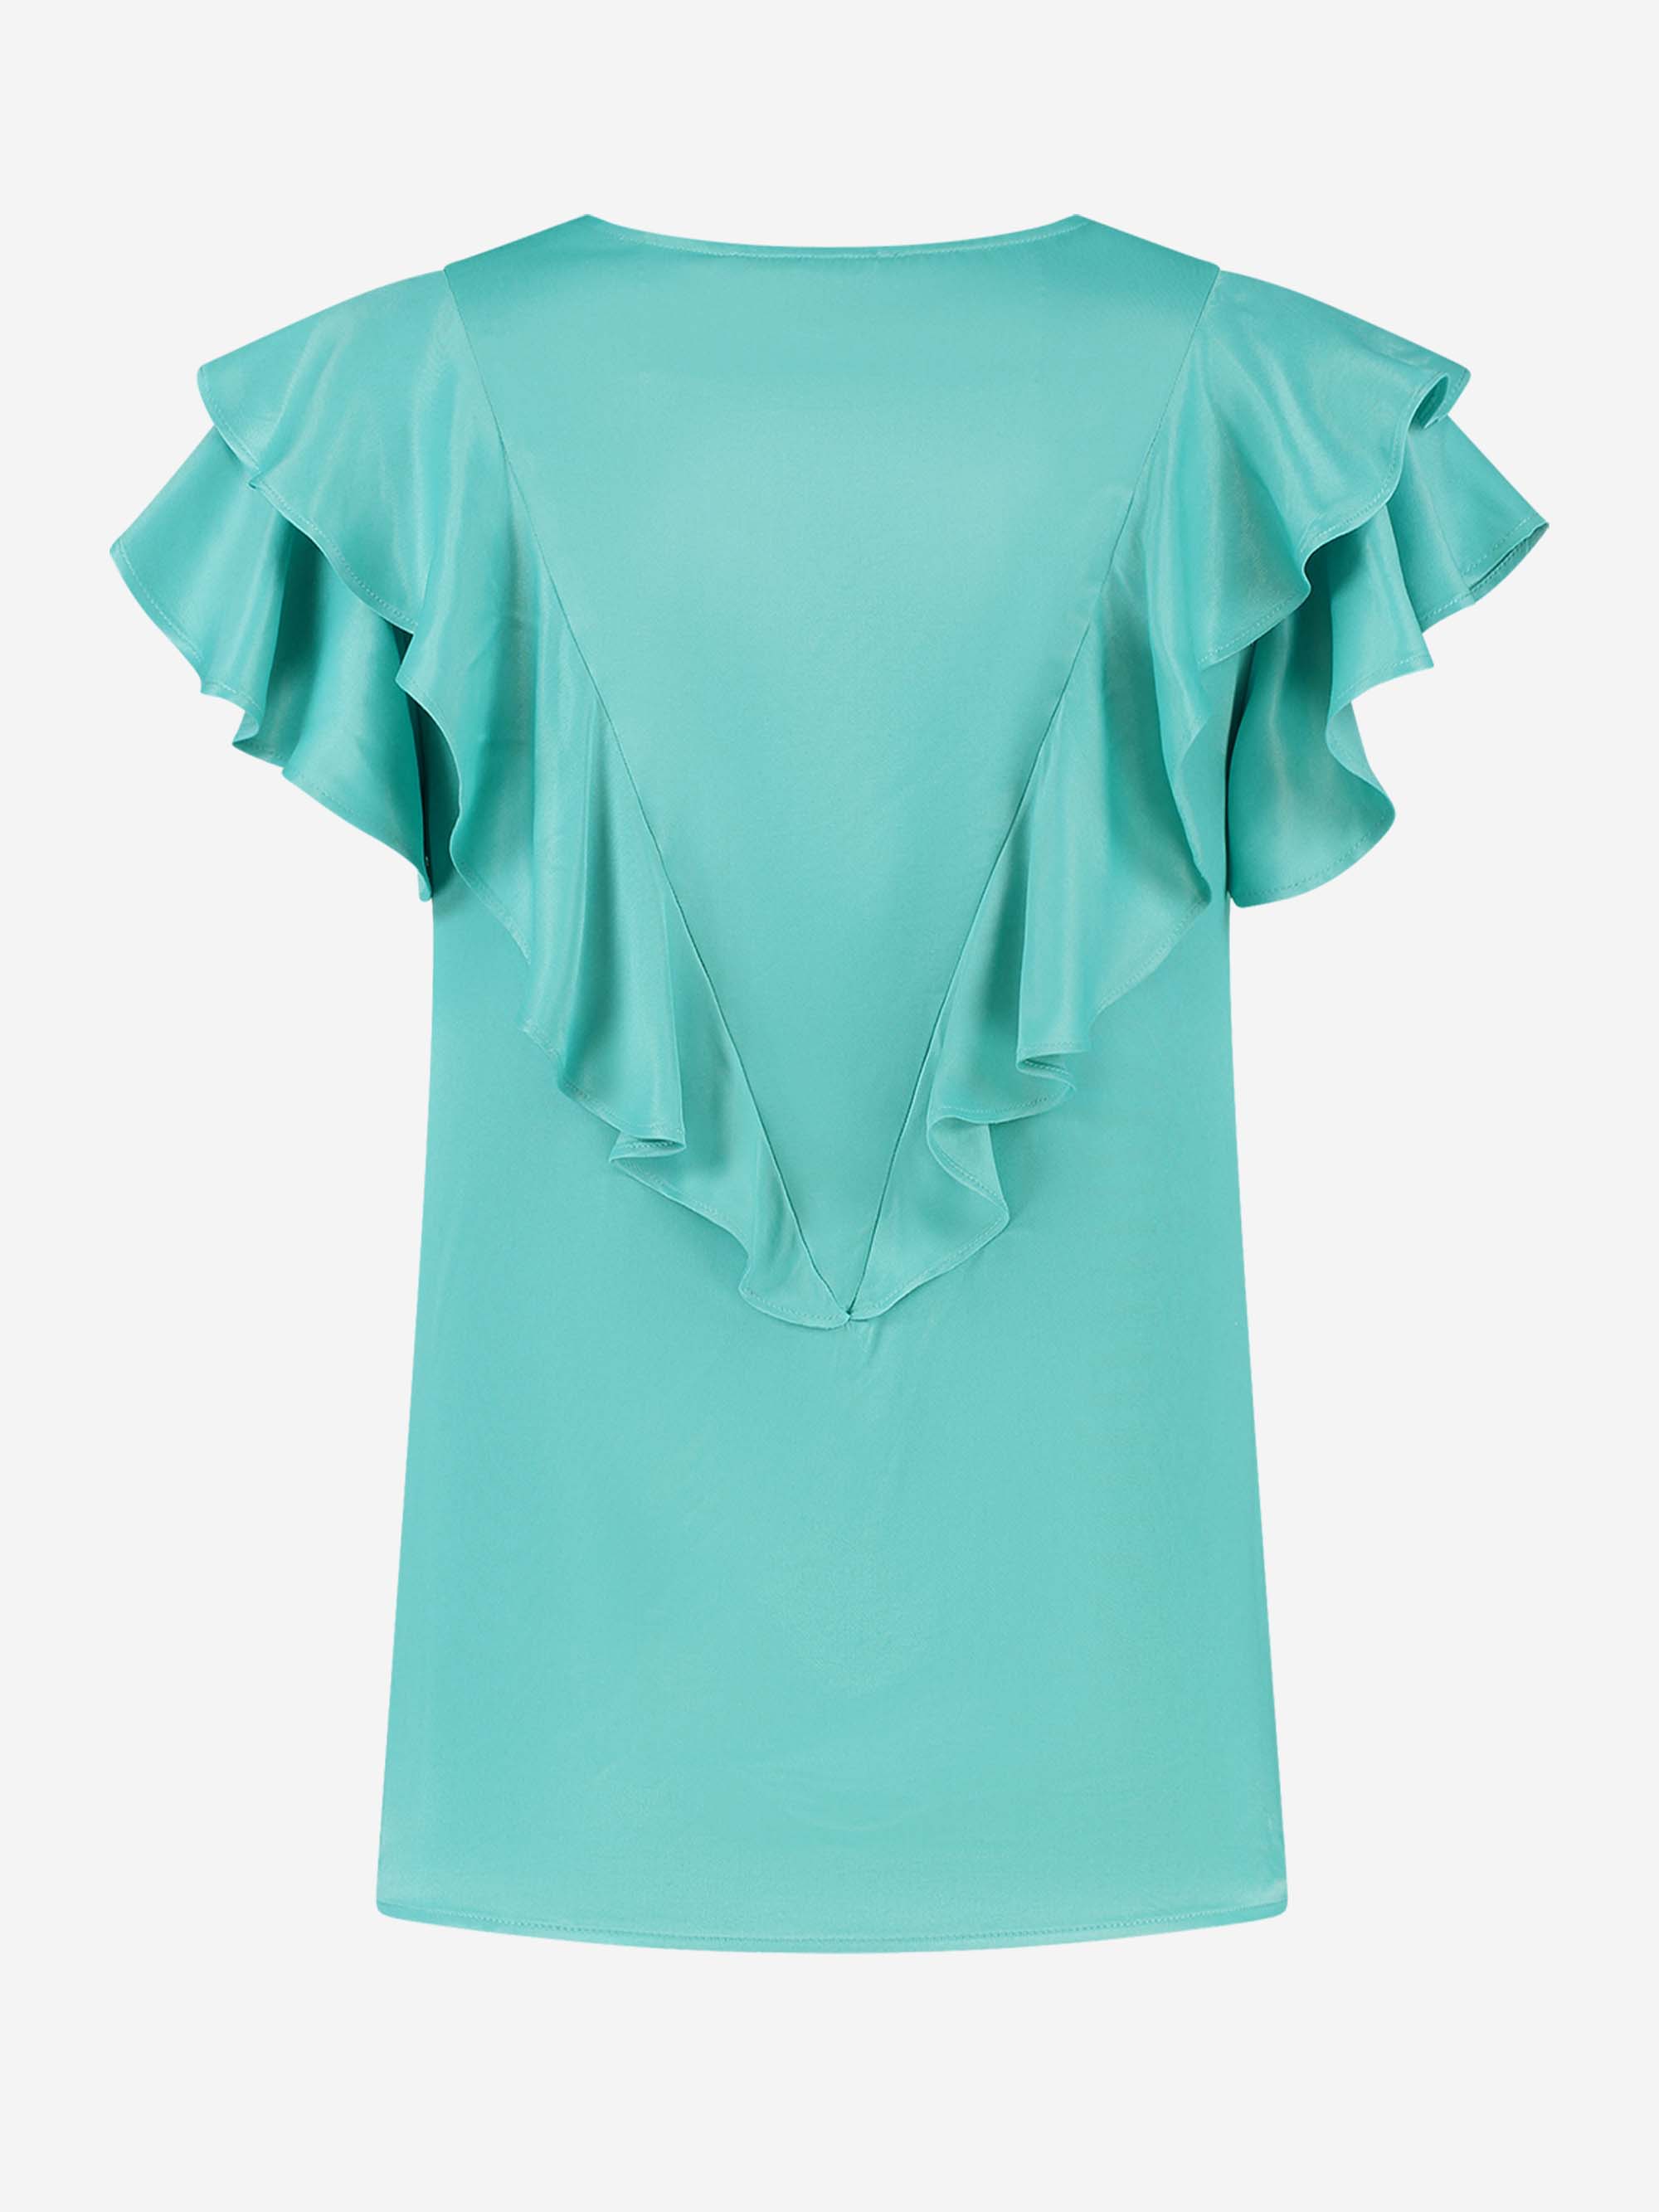 Satin look blouse with ruffles